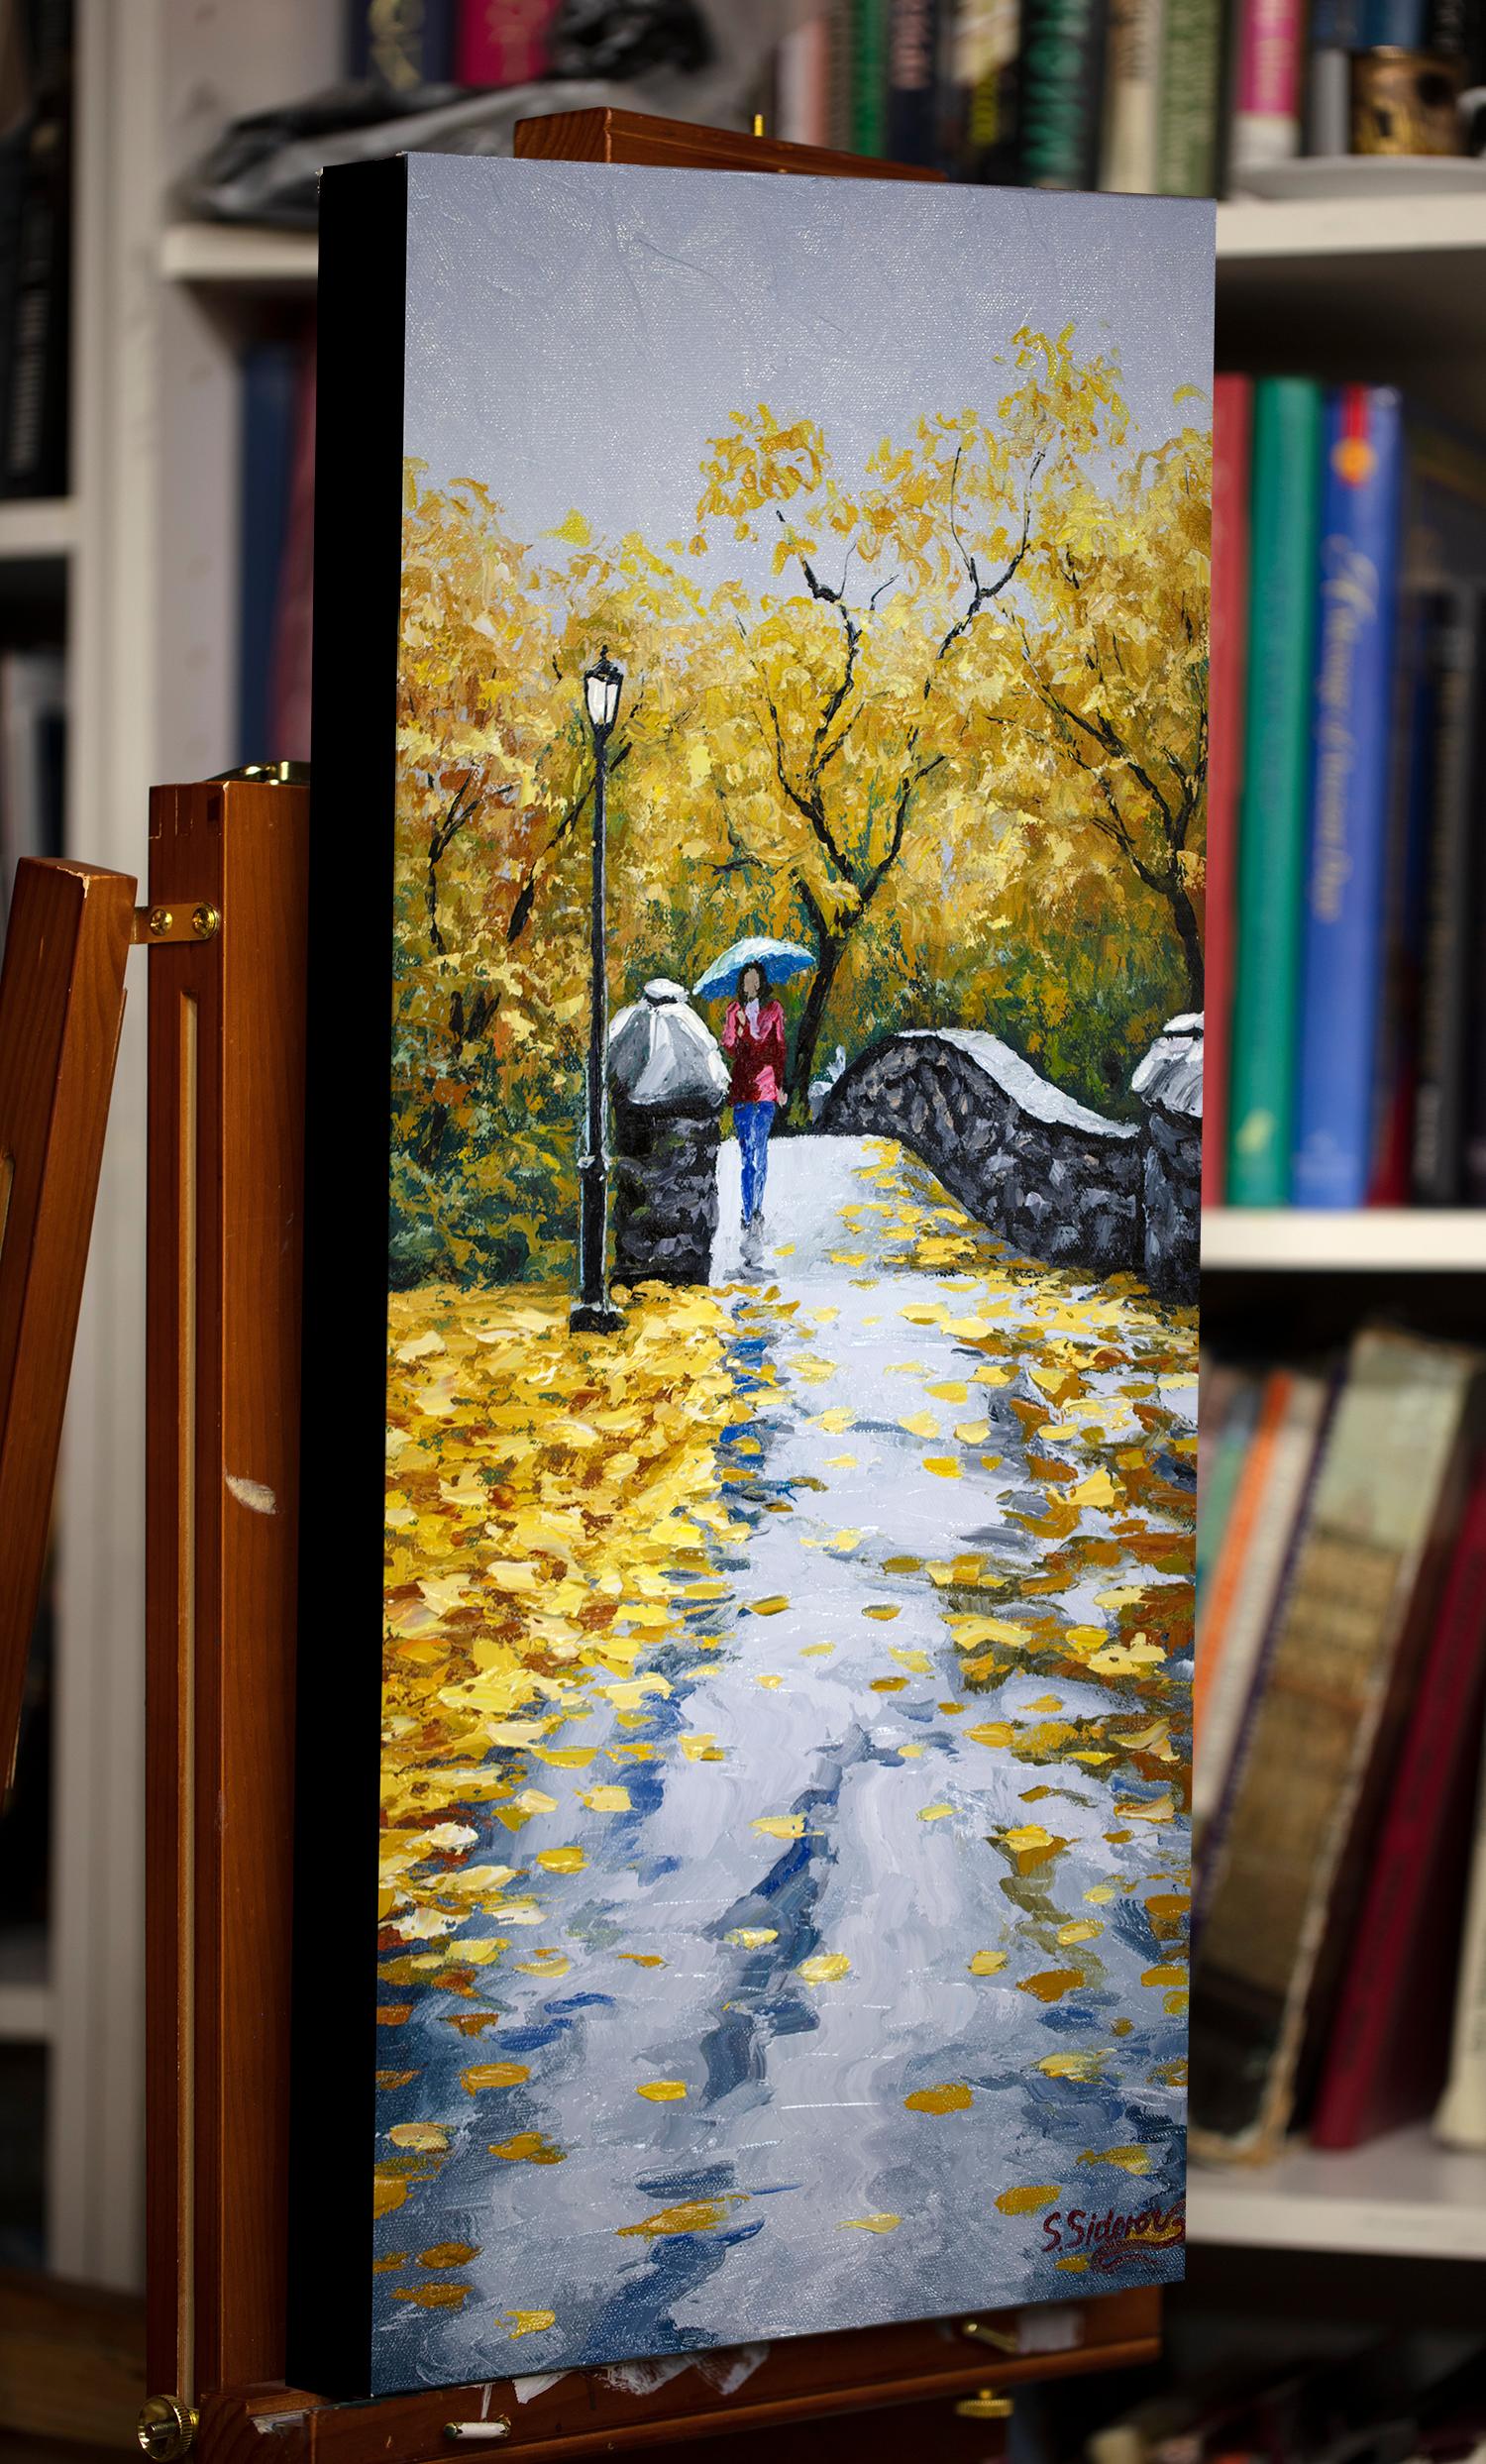 <p>Artist Comments<br>This piece is from my Fall Alley series. Wet sterling path in the park. Rustling leaves and drizzling rain. Charming autumn alley.</p><p>About the Artist<br>Stanislav Sidorov saturates his canvas with the expressive color